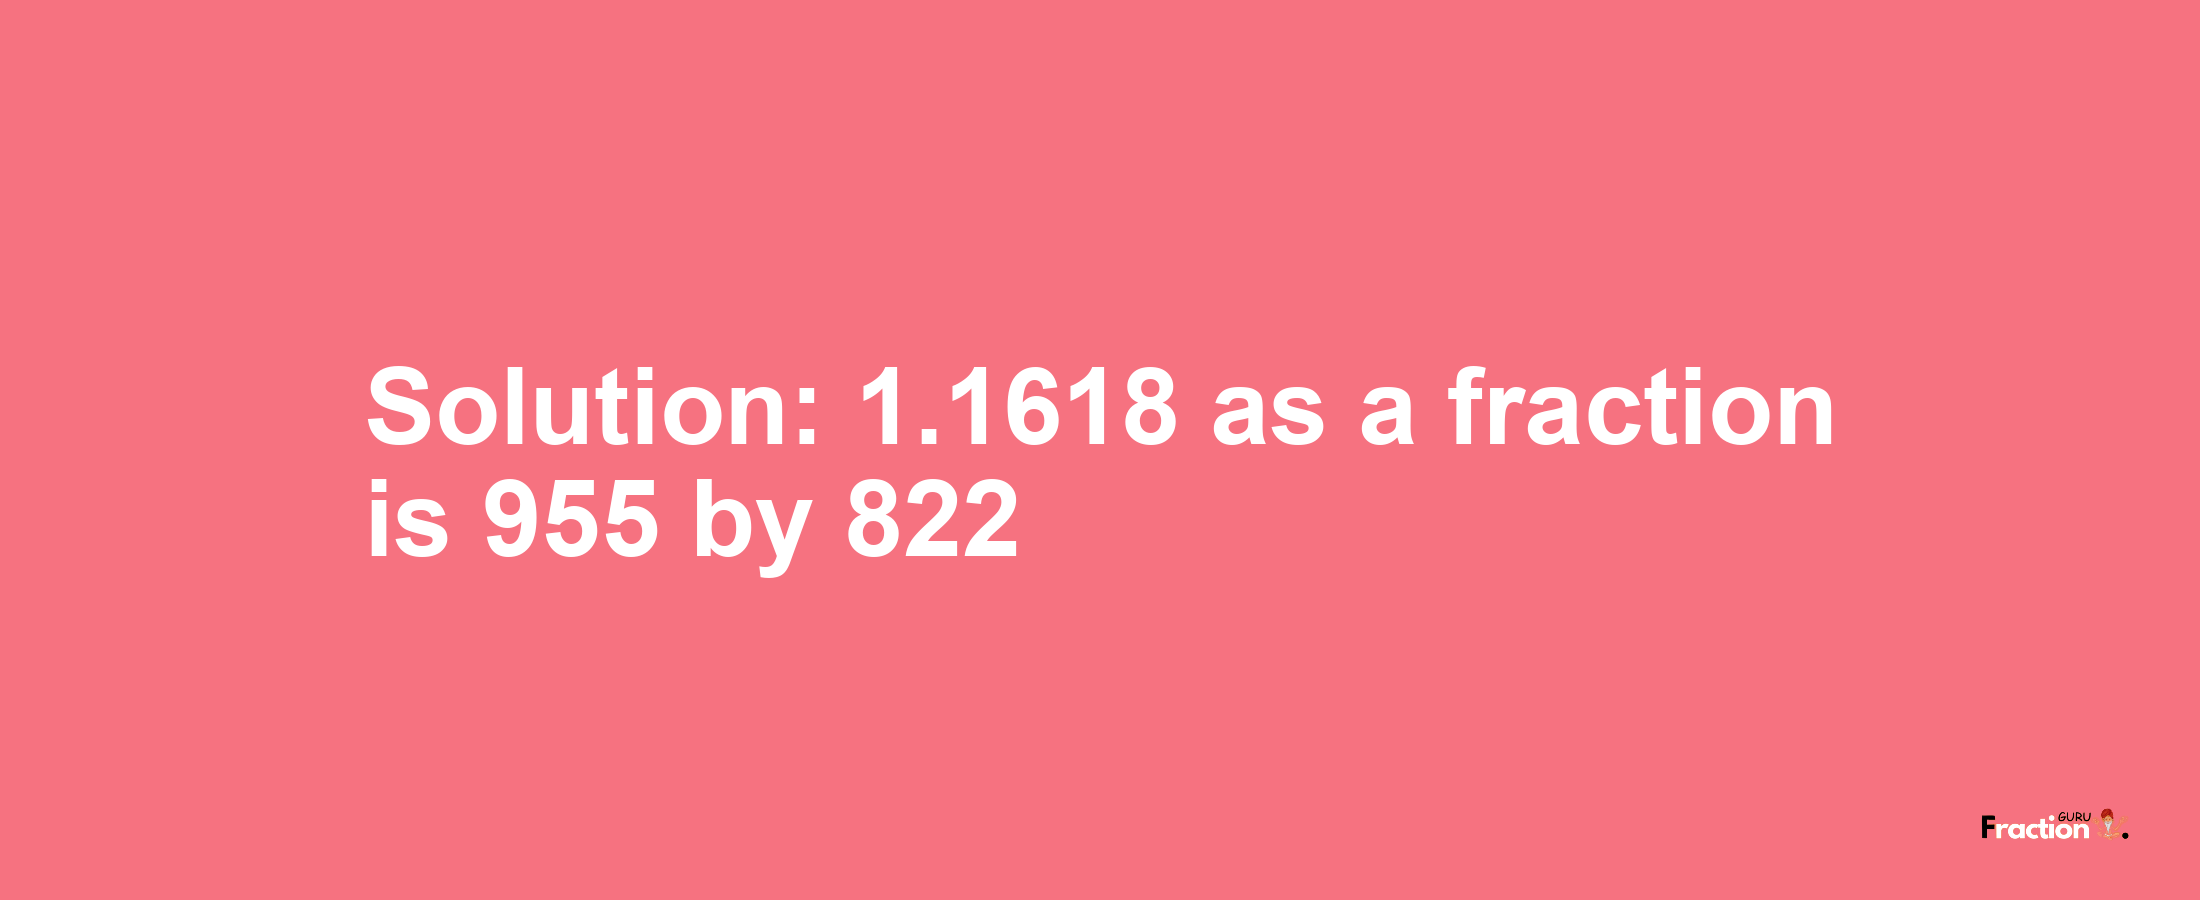 Solution:1.1618 as a fraction is 955/822